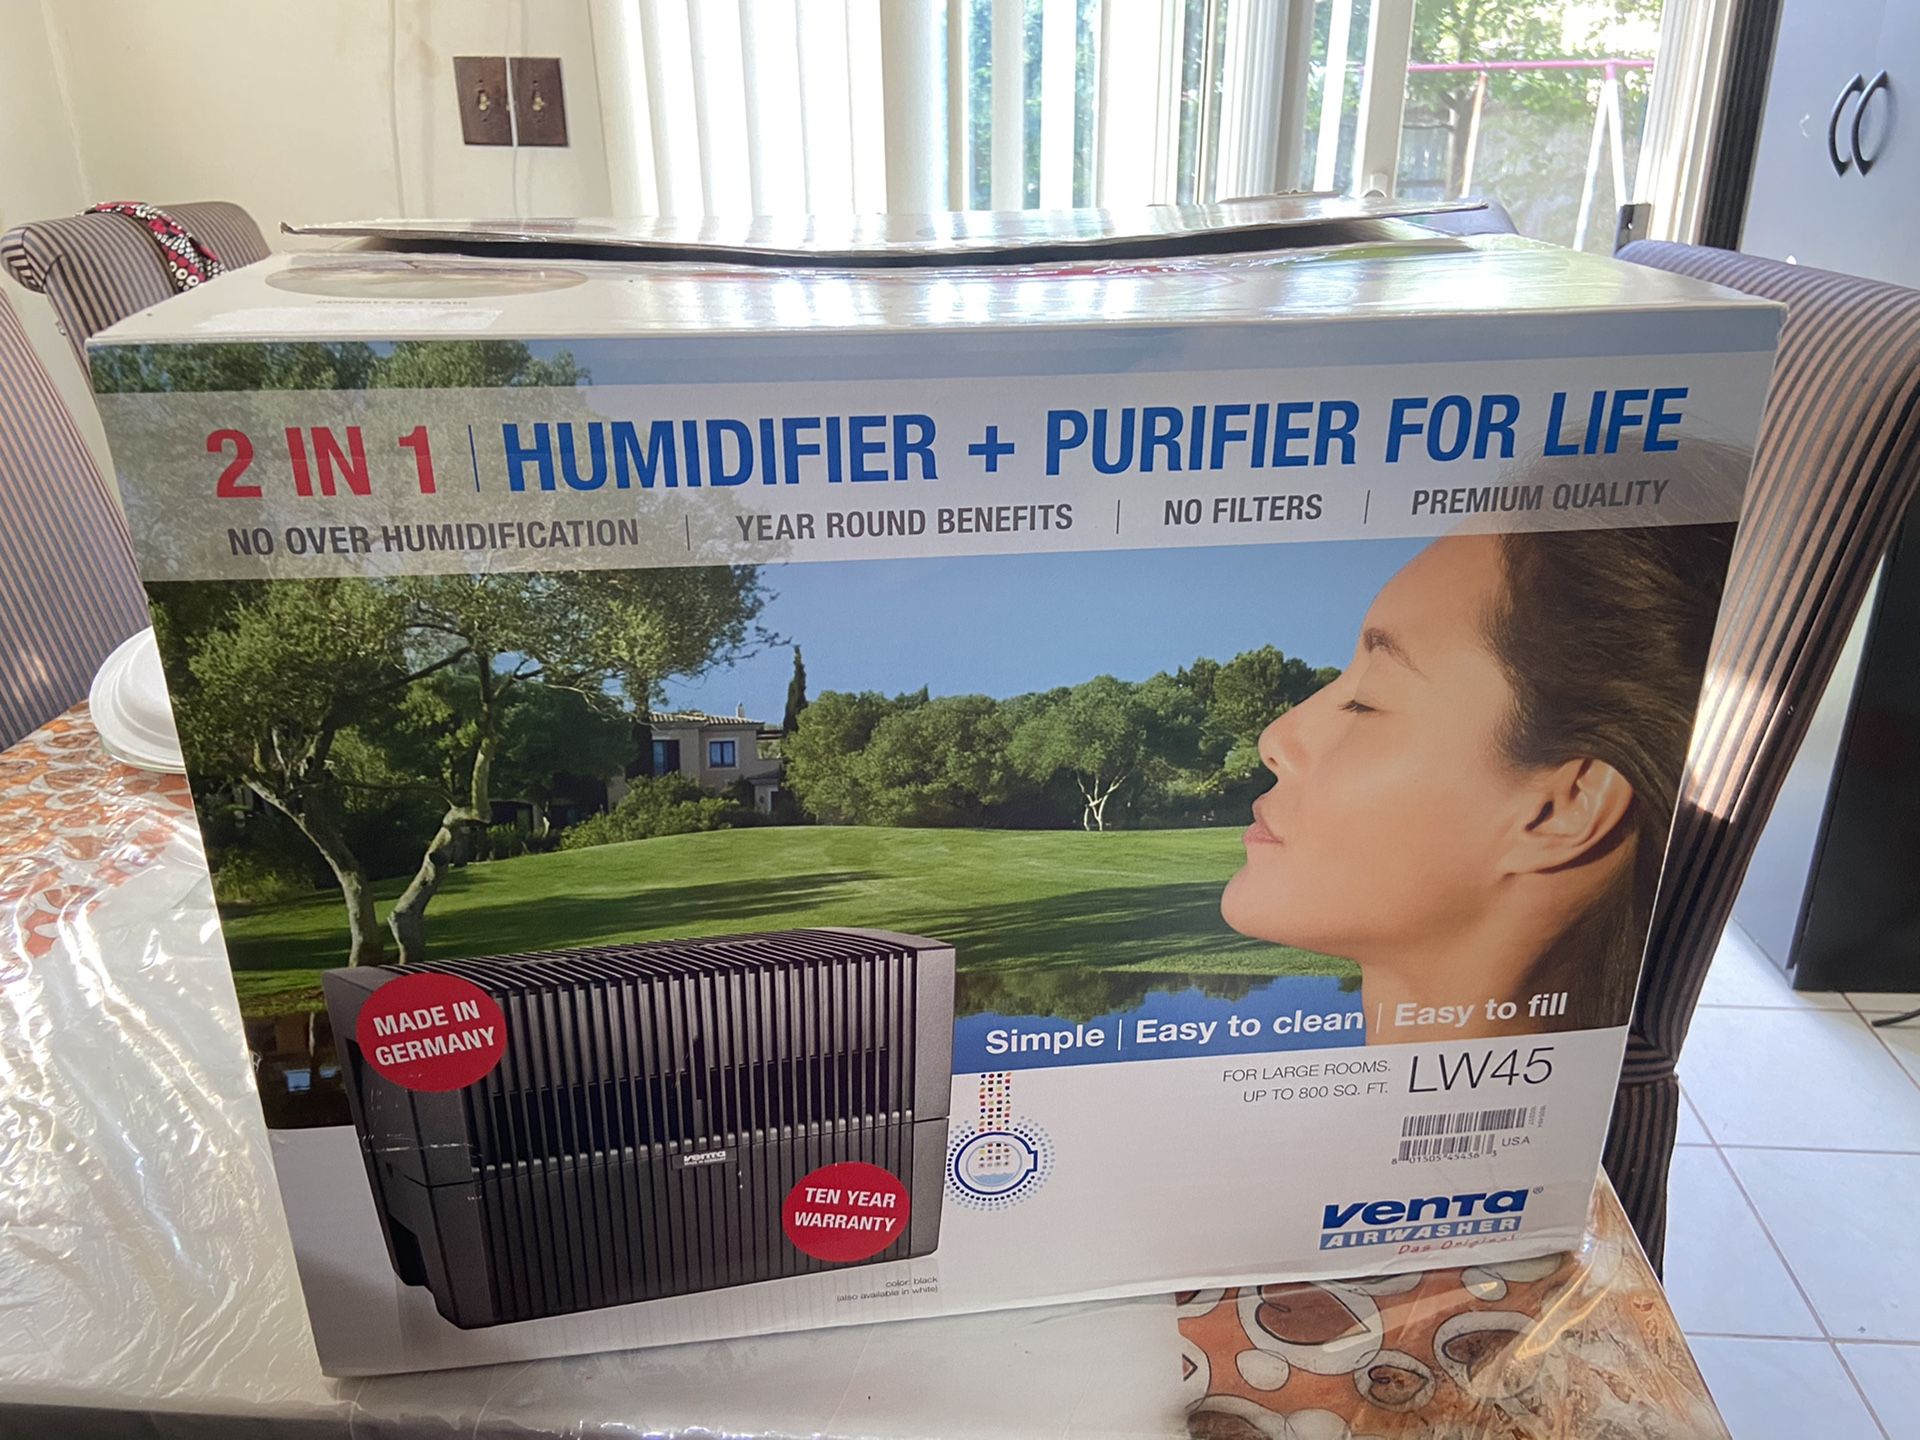 VENTA LW45 Brand New In A Box Airwasher 2-in-1 Humidifier And Purifier